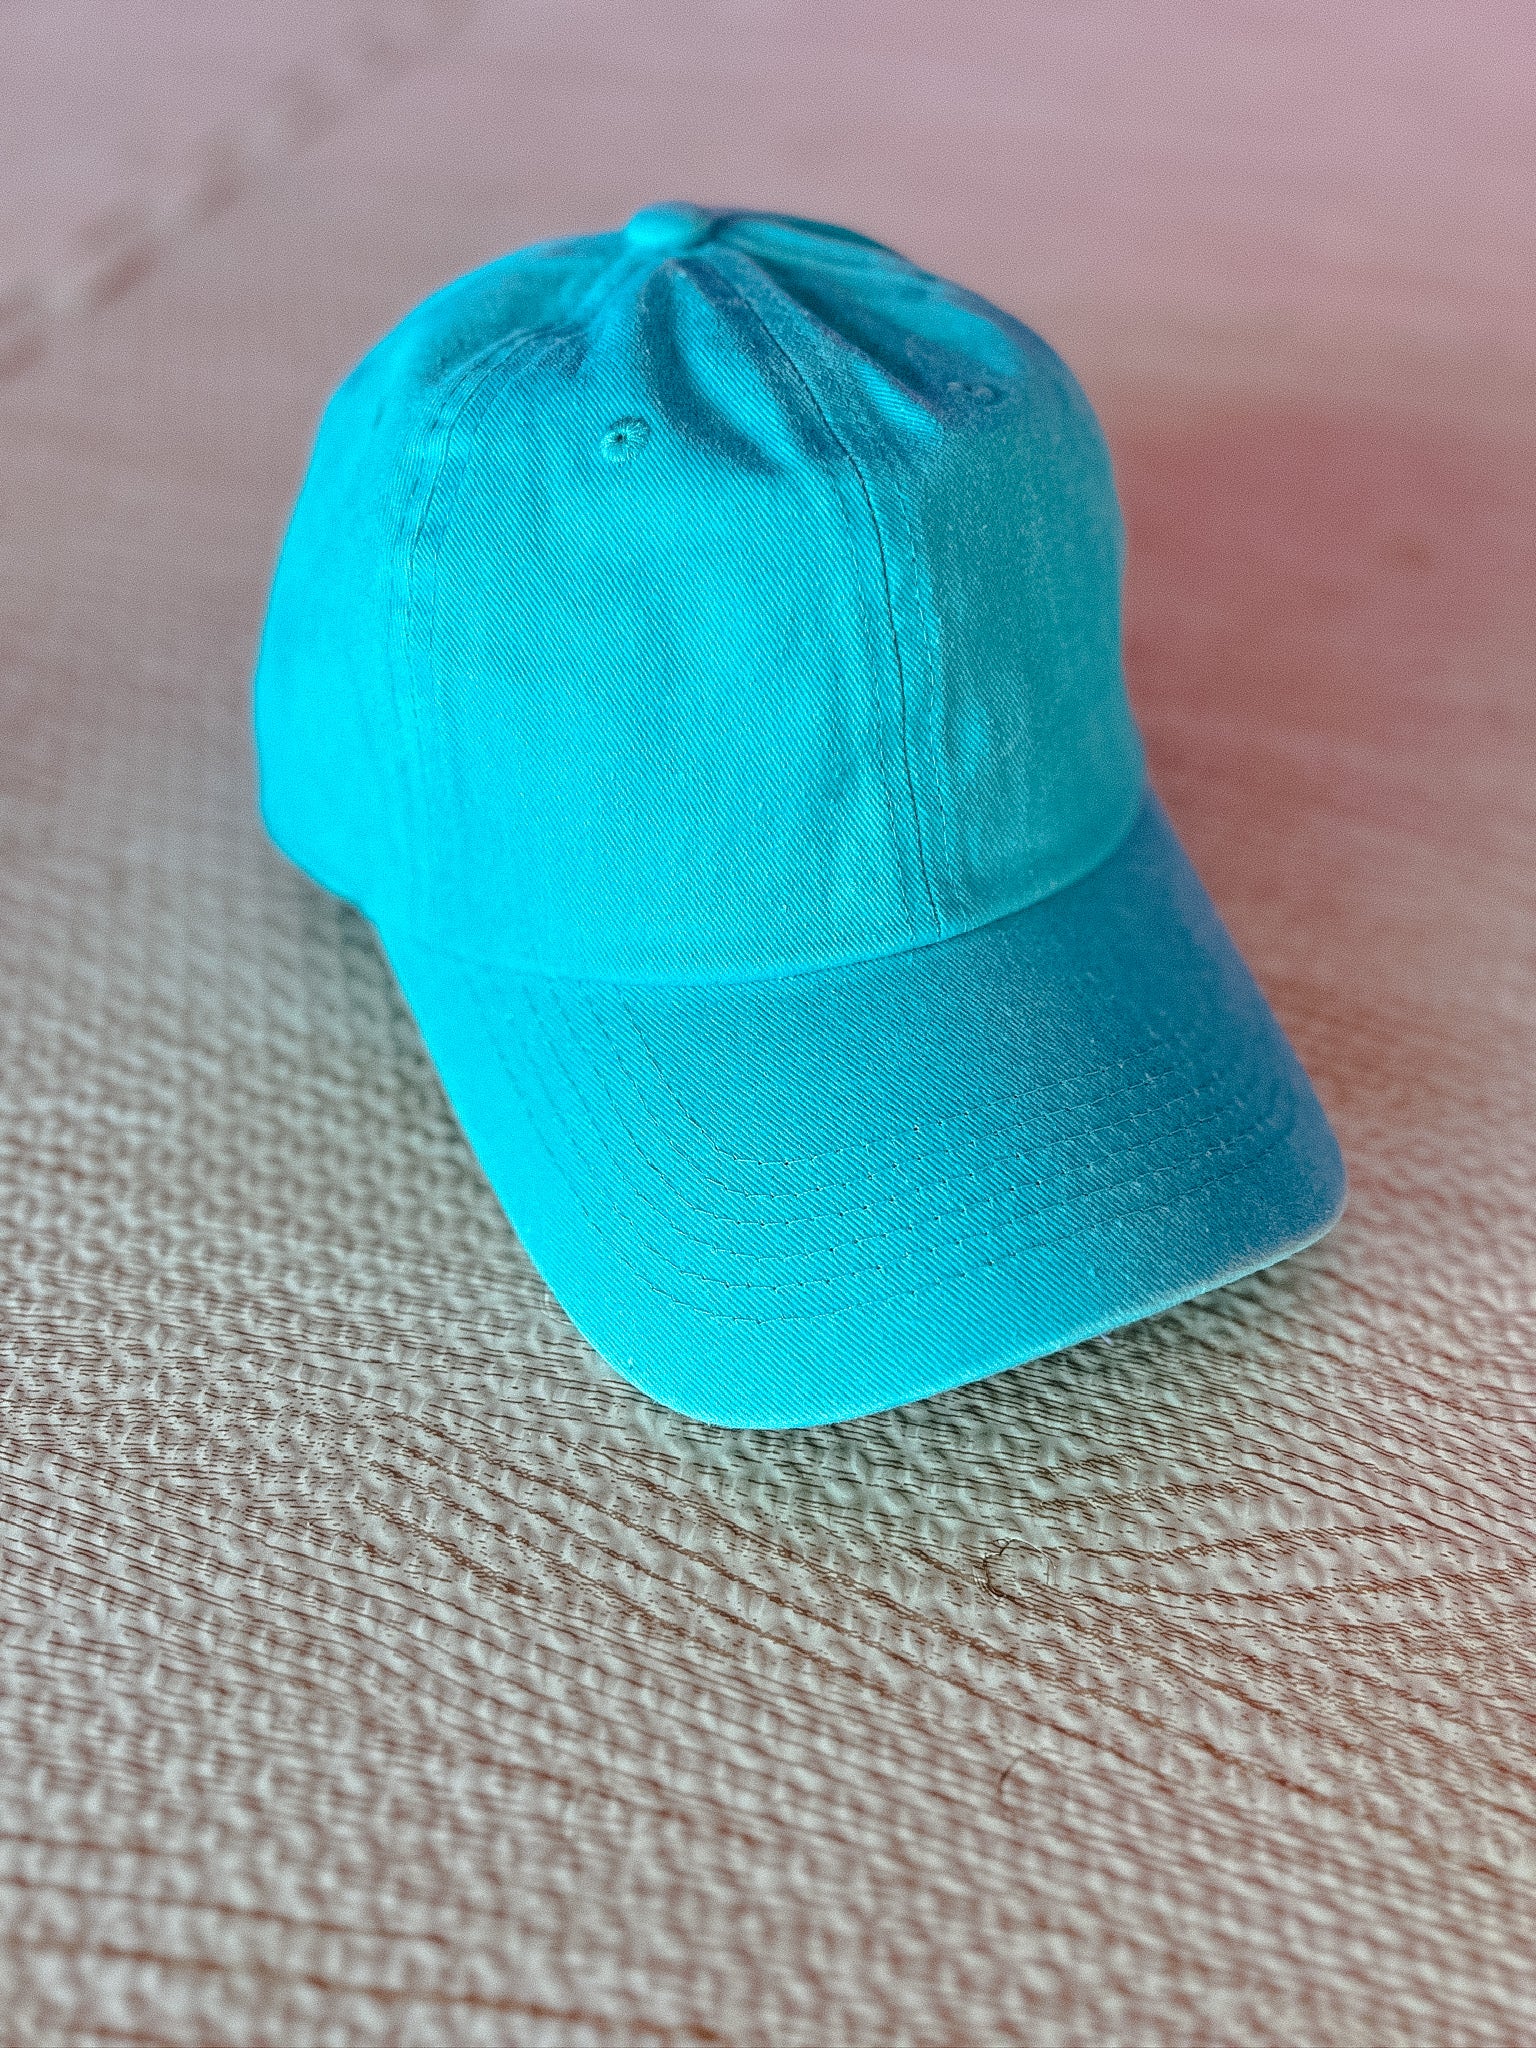 Off Duty Ball Cap - Turquoise